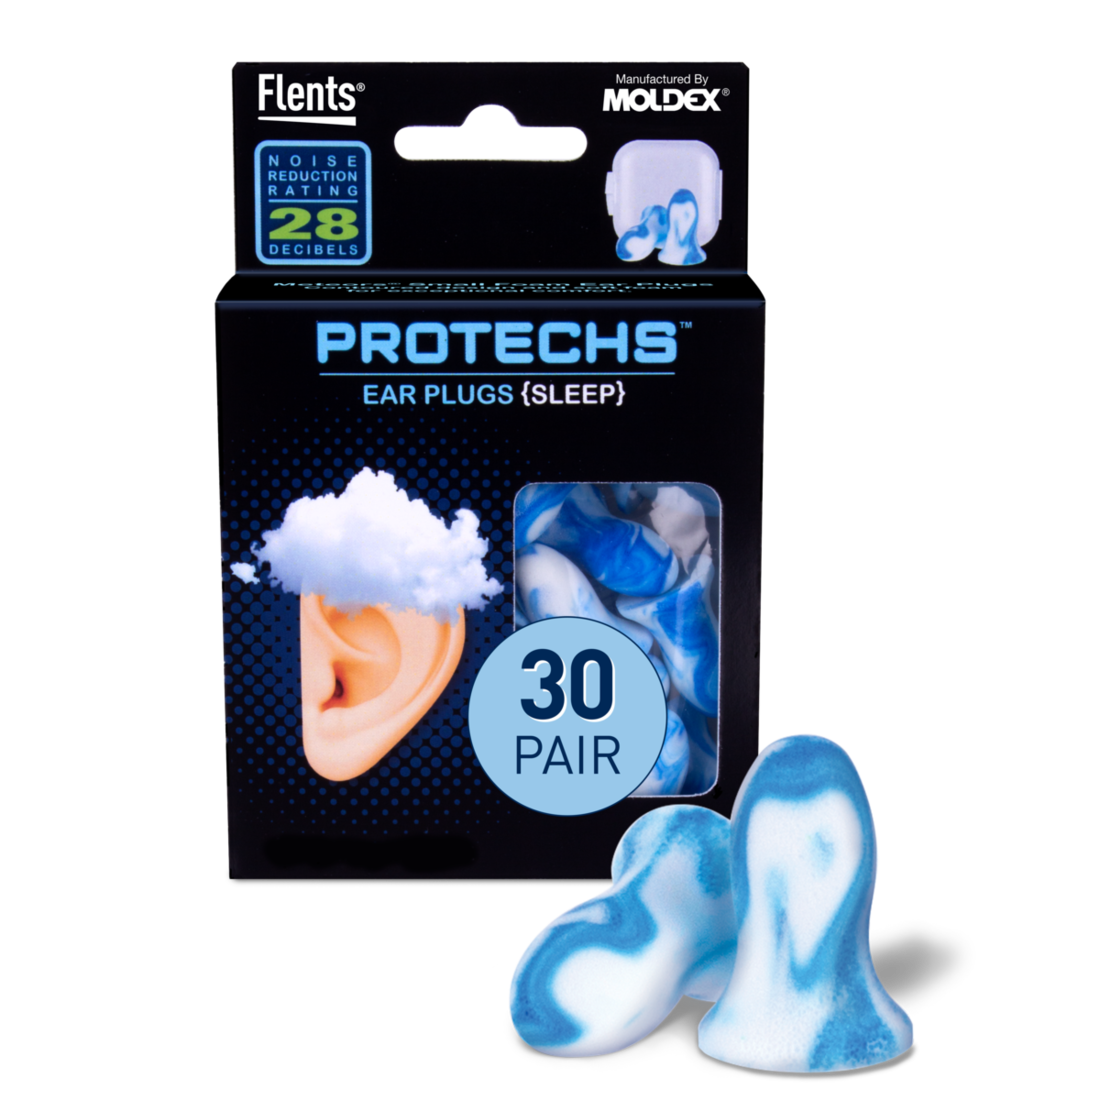 Flents PROTECHS™ Ear Plugs for Sleeping, 30 Pair with Case, NRR 28 - image 1 of 7